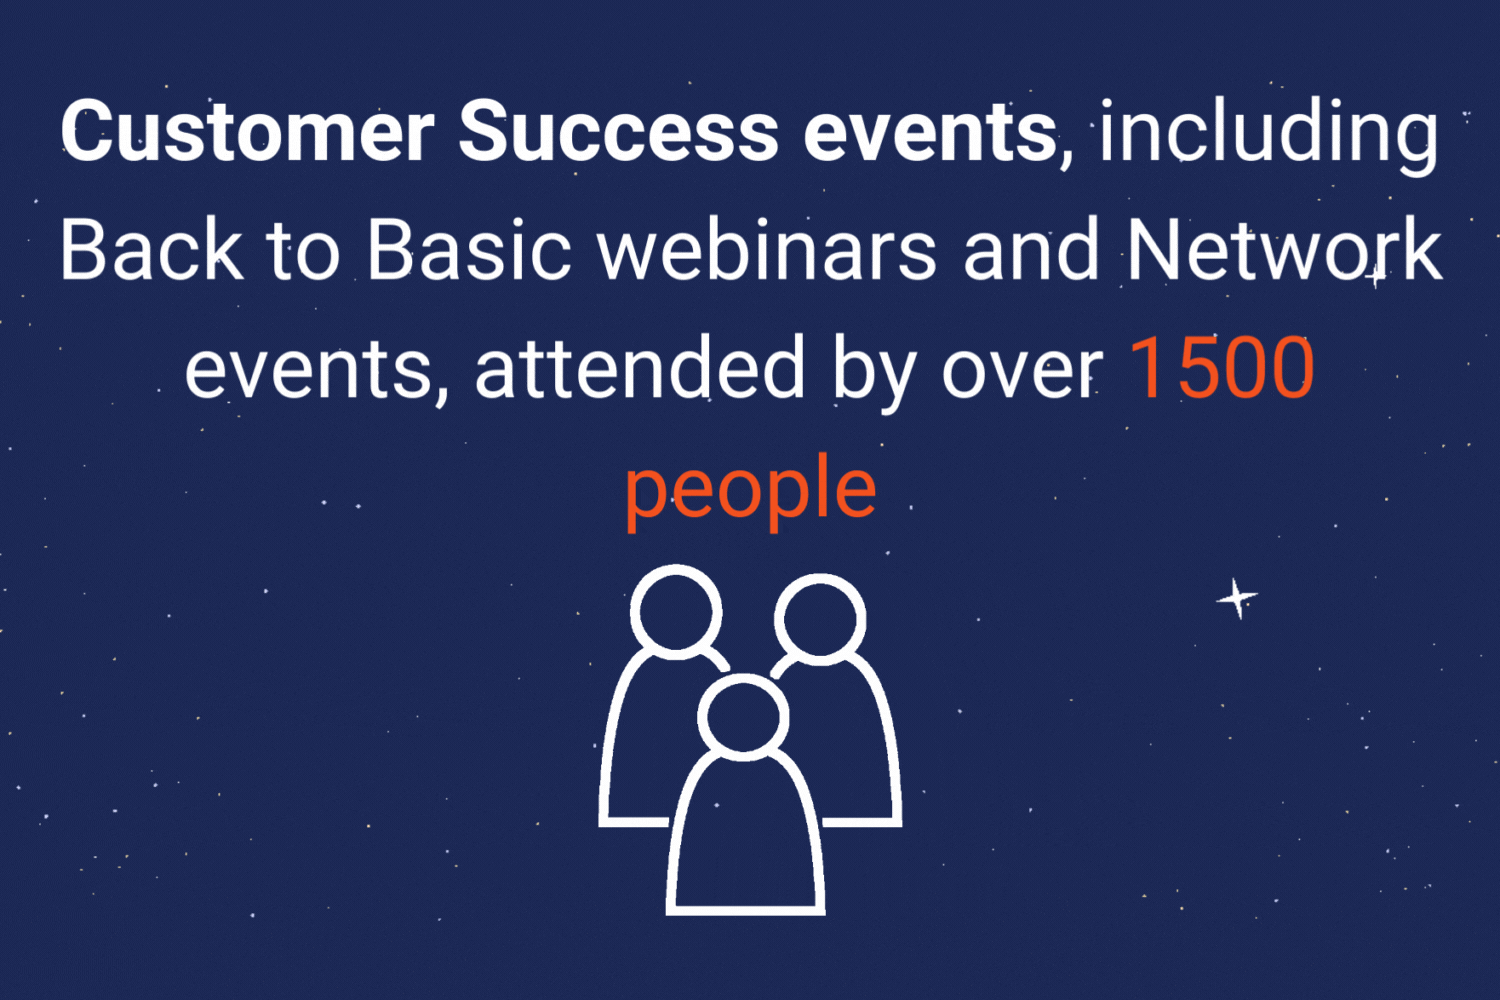 Customer Success events, including Back to Basic webinars and Network events, attended by over 1500 people